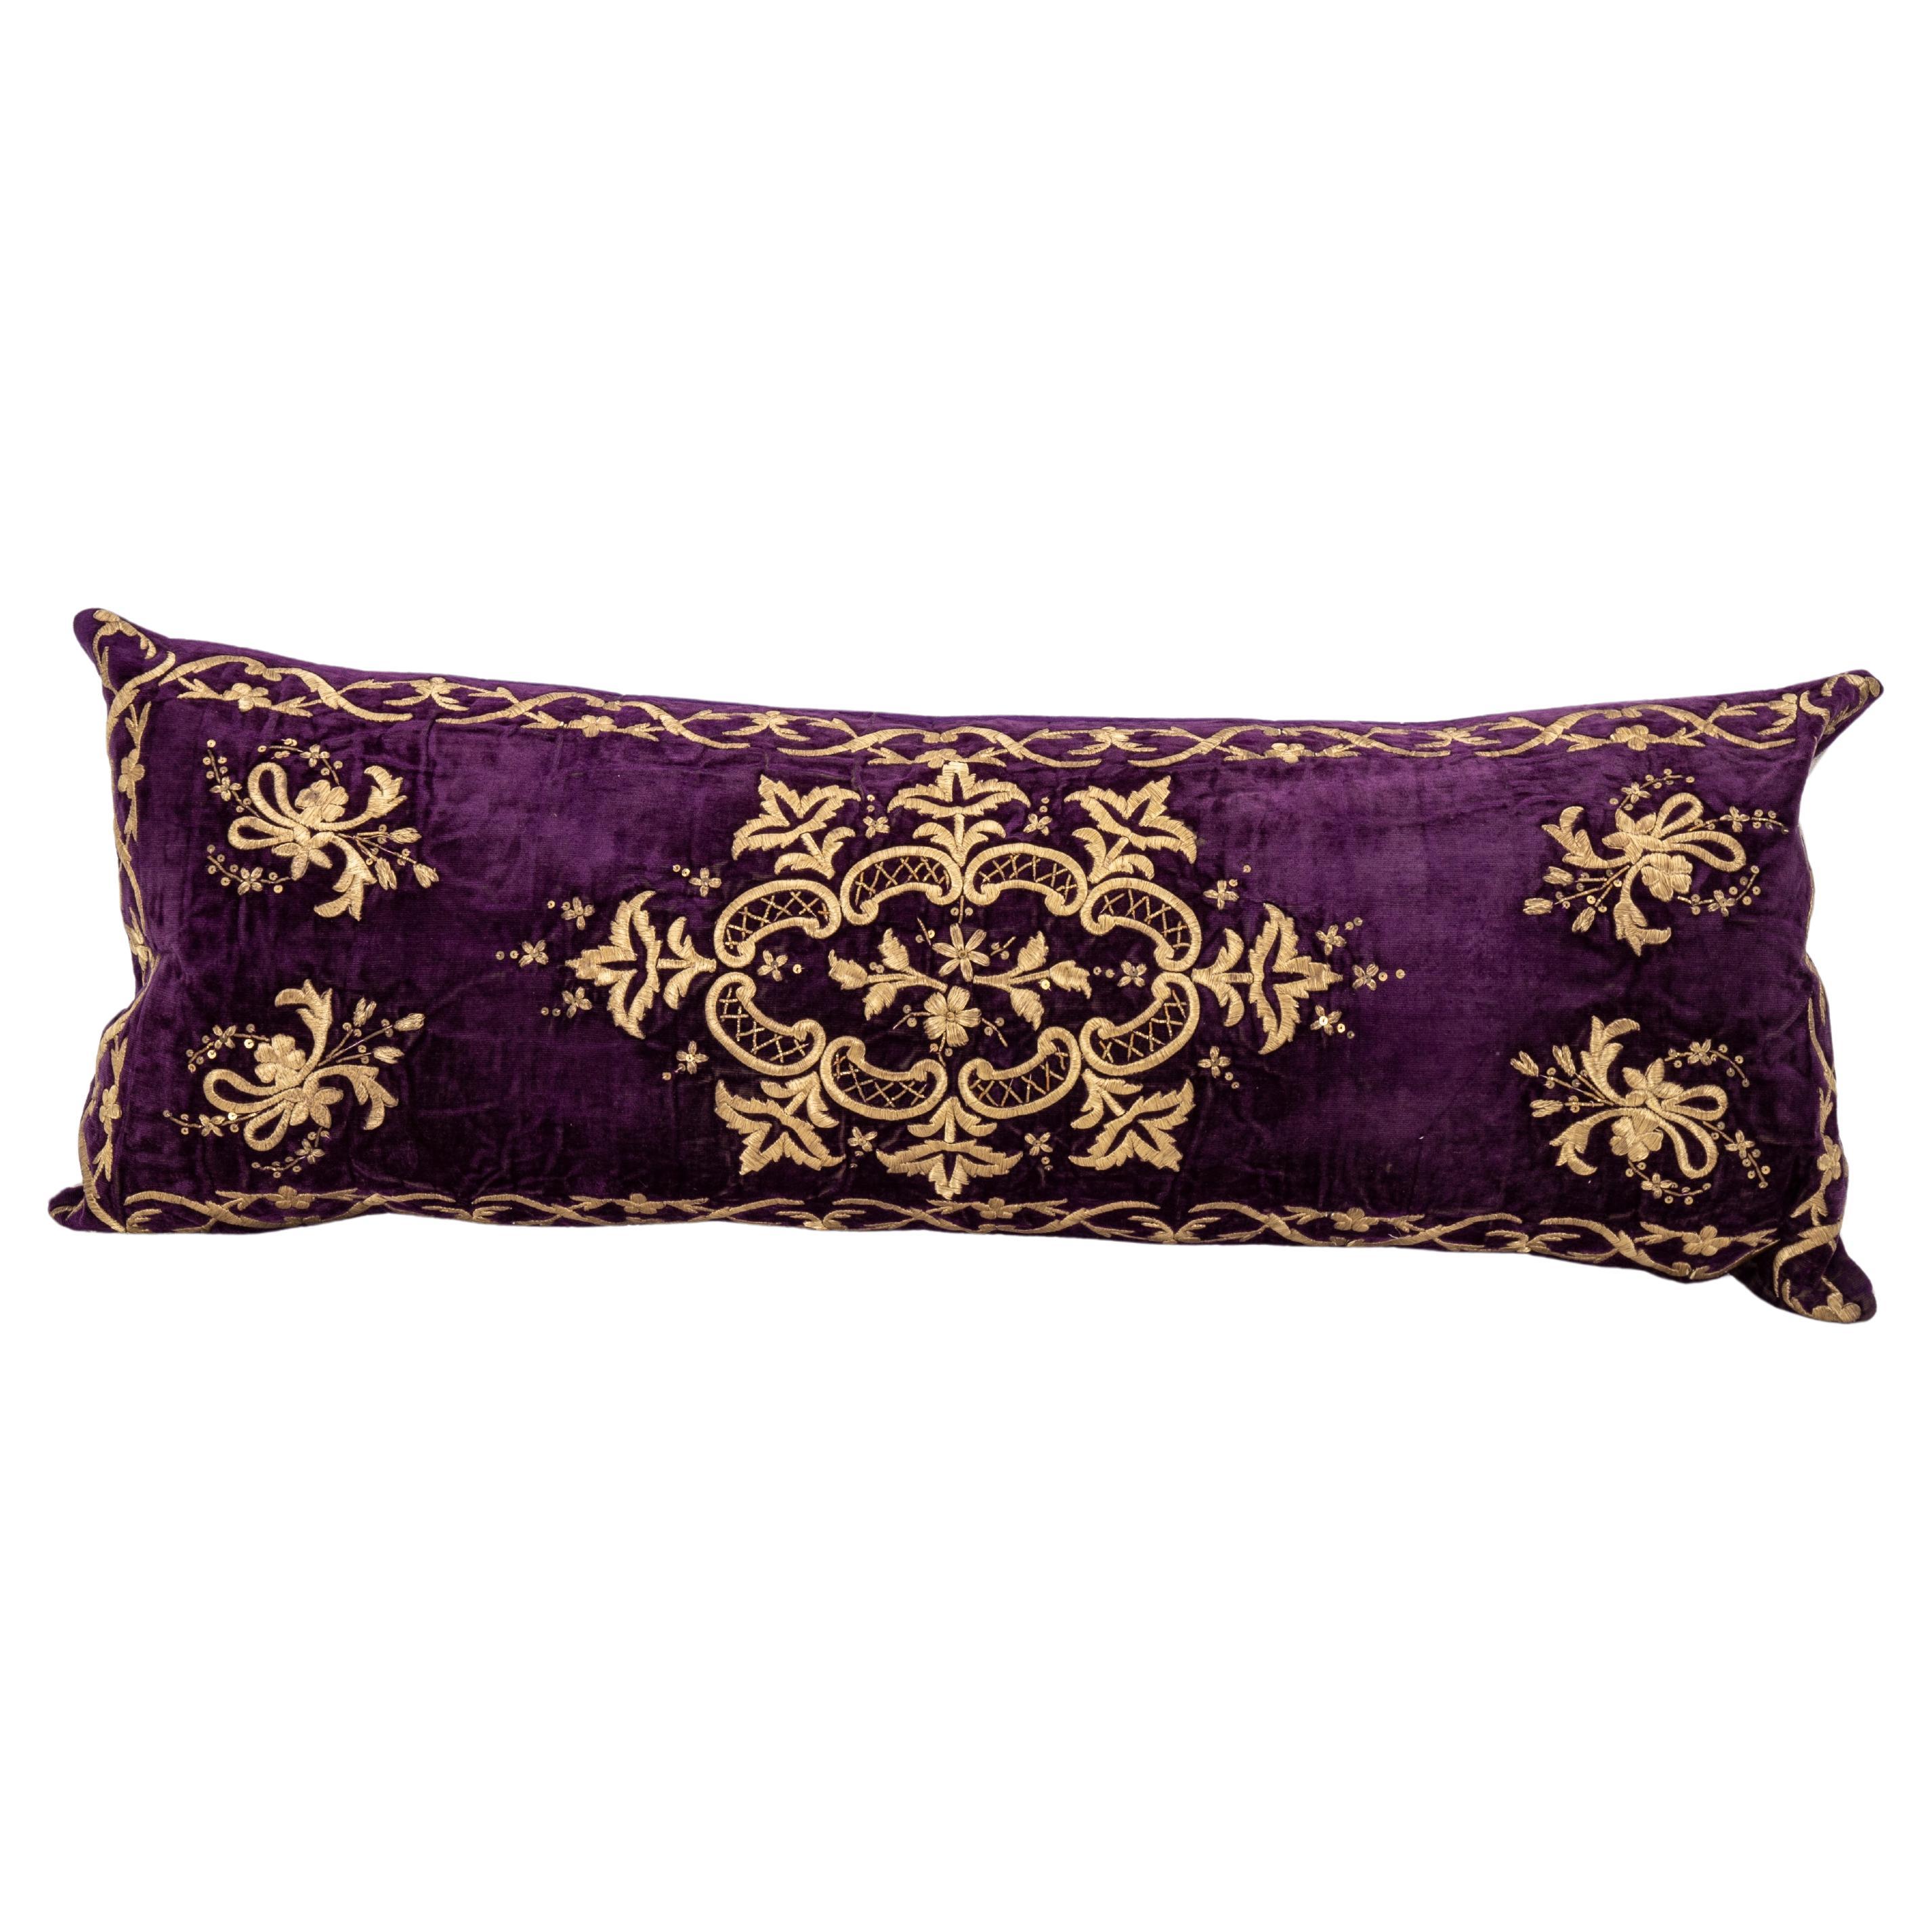 Ottoman / Turkish Pillow Cover in Sarma Technique, late 19th / Early 20th C. For Sale